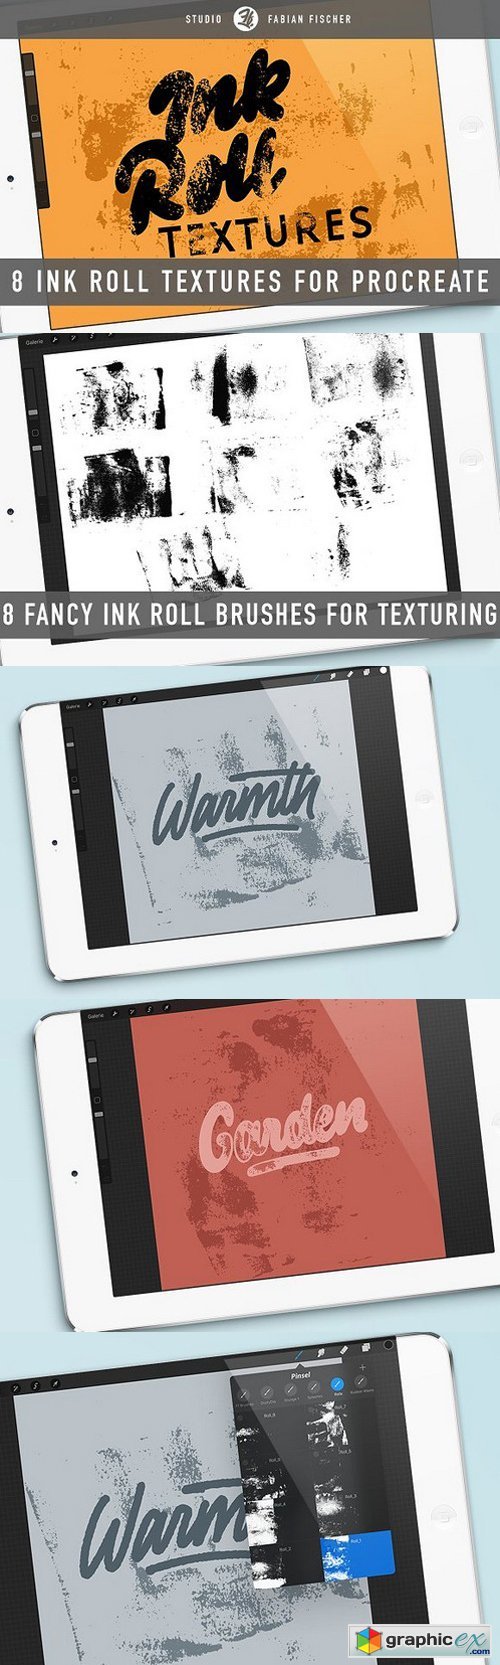 Ink roll textures for procreate app